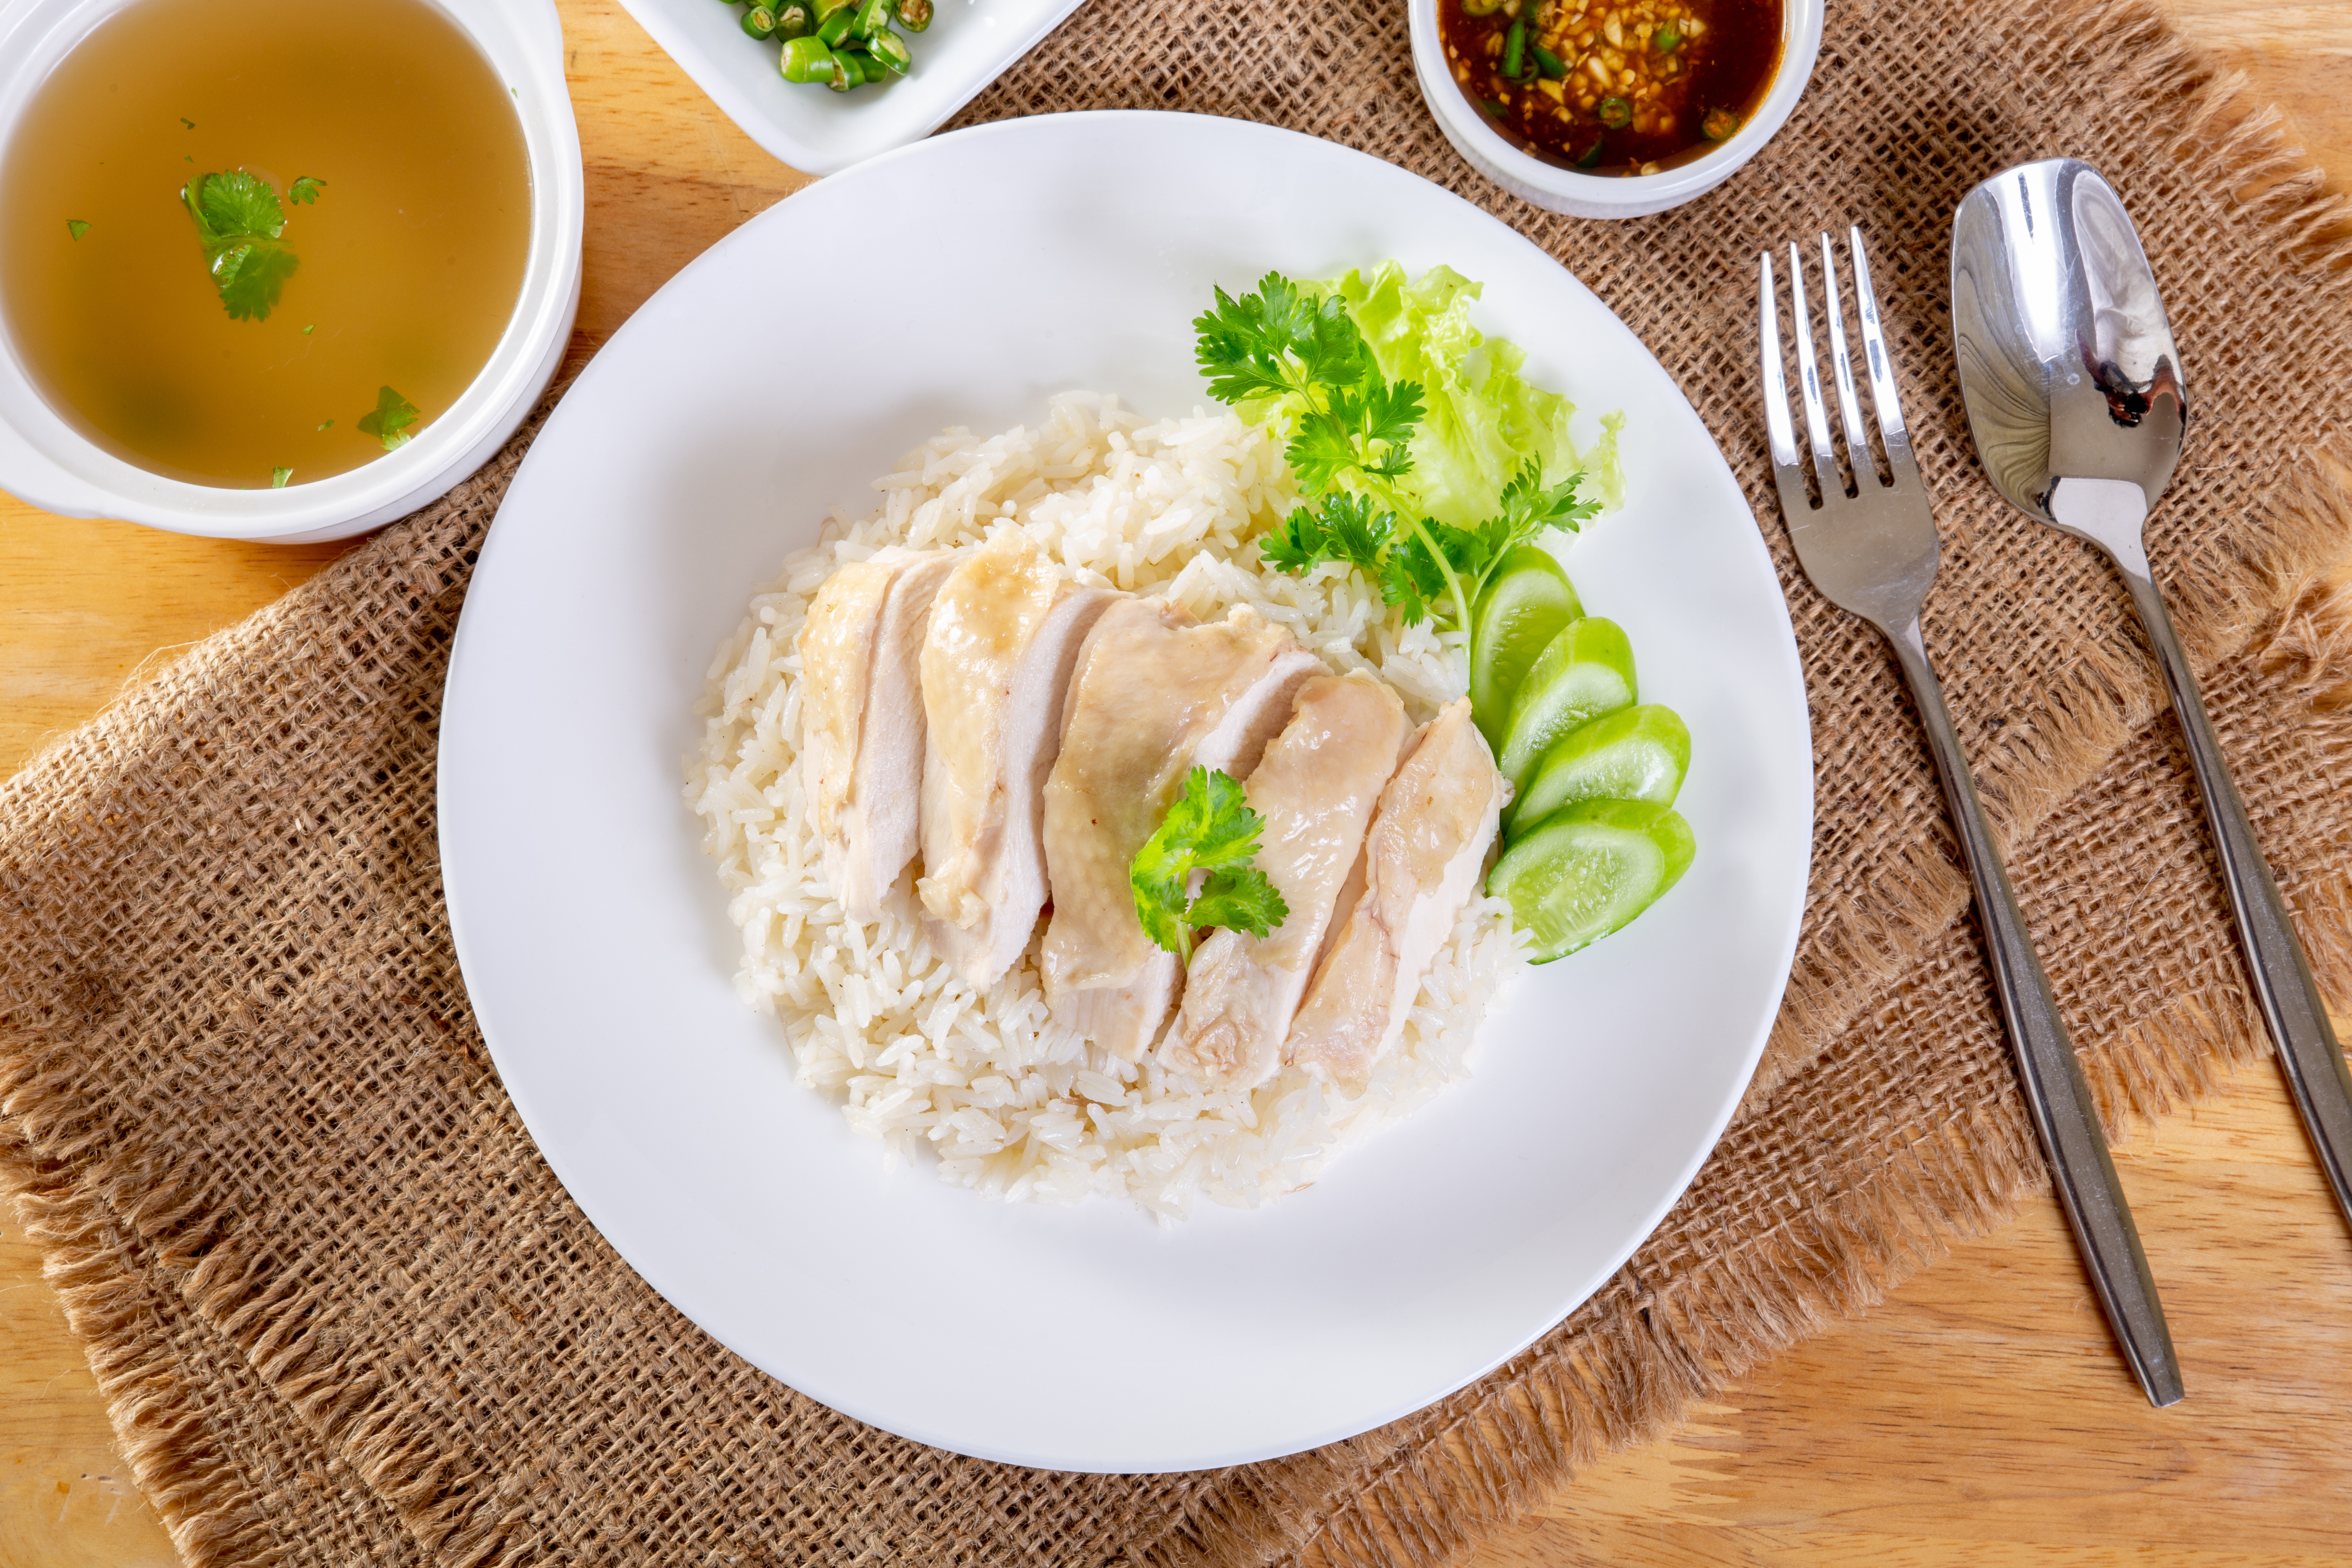 How To Steam Chicken For Healthy Eating?  